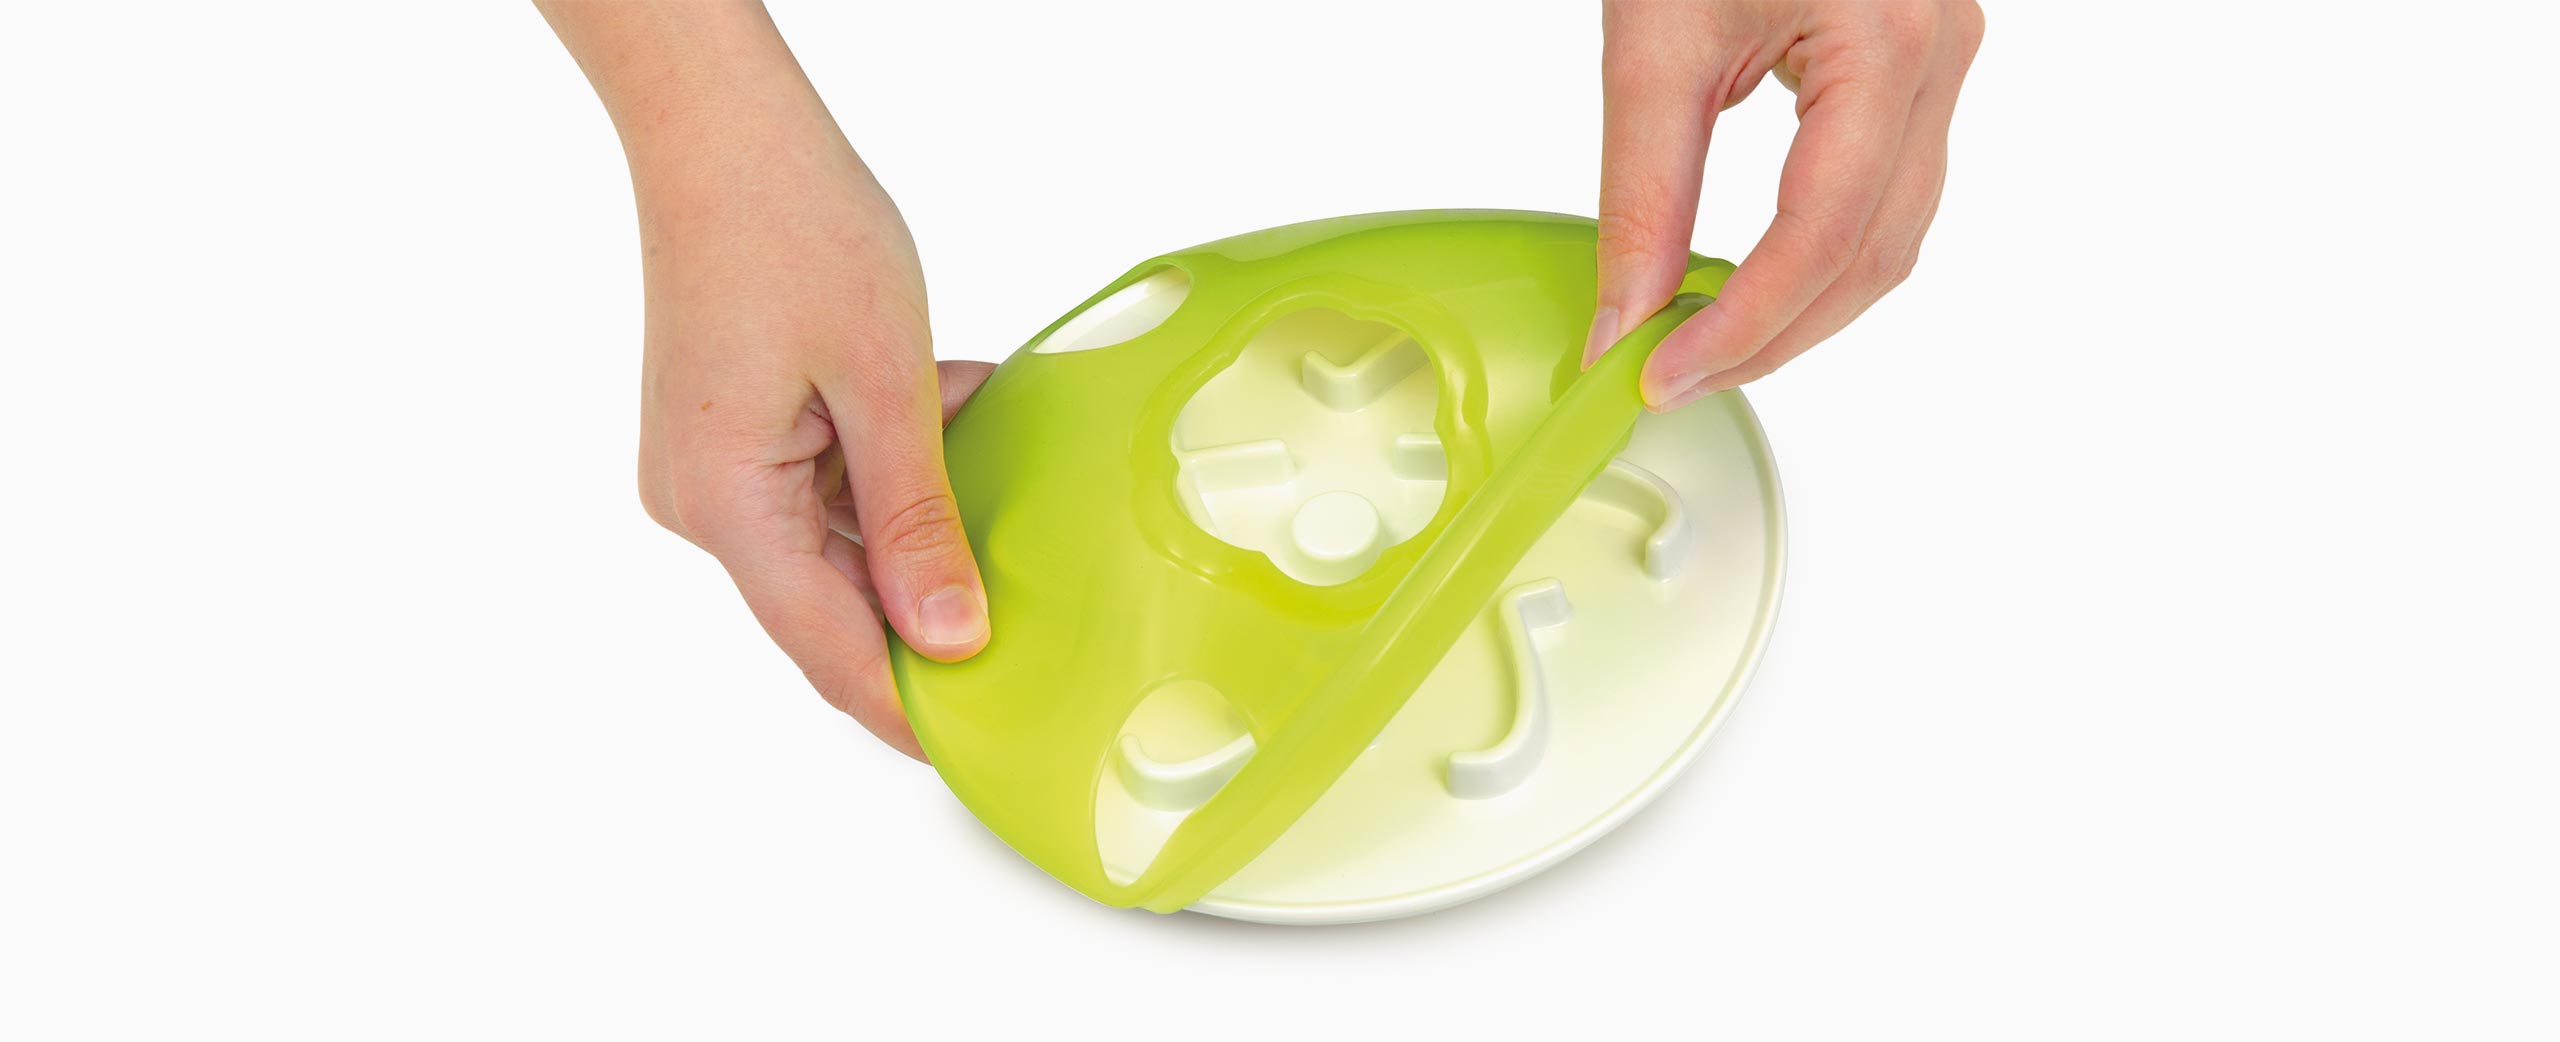 Removable silicone cover for easy cleaning in the dishwasher